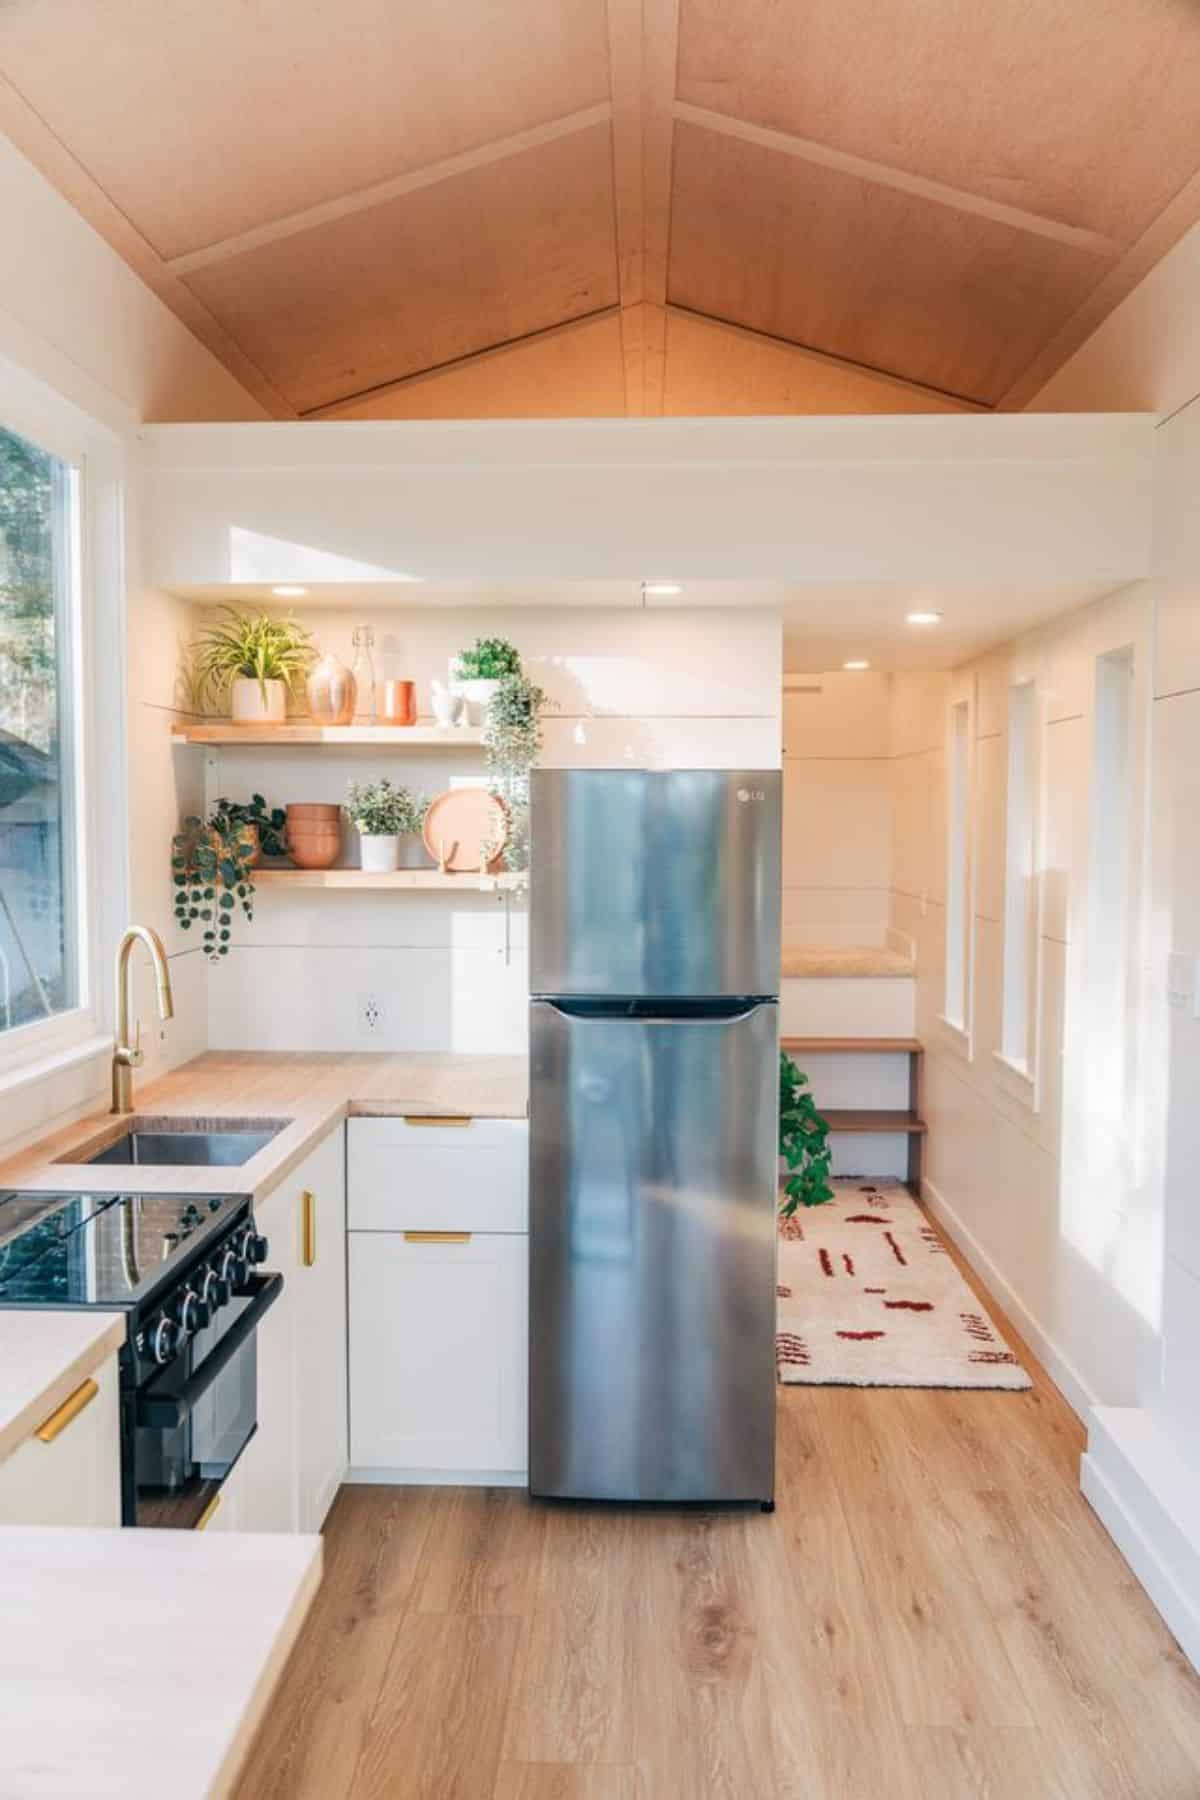 double door refrigerator and propane gas stove in kitchen area of beautifully crafted tiny home